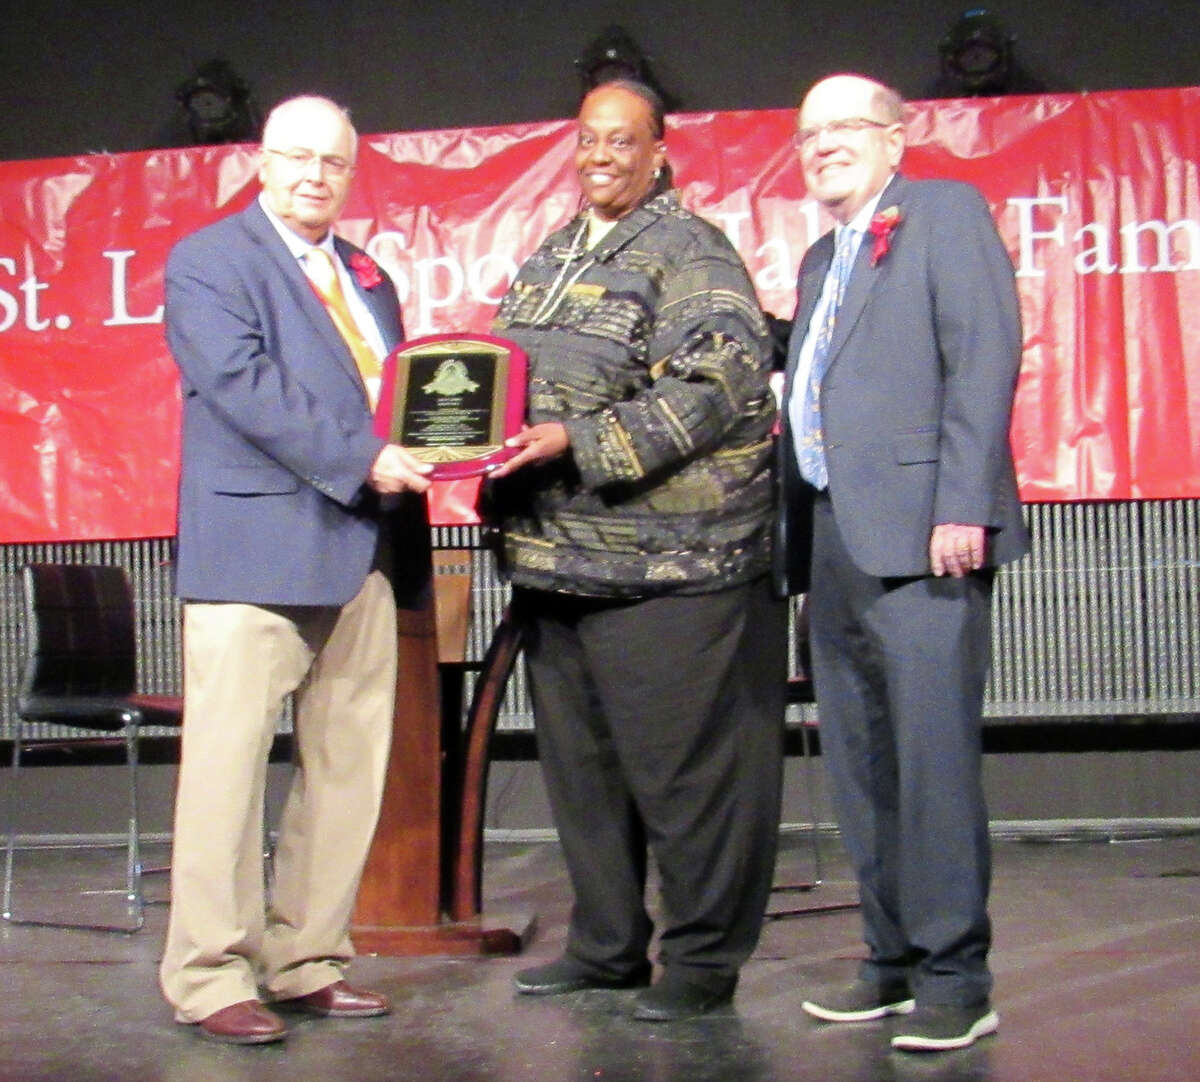 Former Alton High basketball great Cathy Snipes, center, receives her St. Louis Sports Hall of Fame award from Hall of Fame director Tim Moore, left, on Monday night at the annual Hall of Fame induction banquet in O'Fallon. Also pictured is former Telegraph sports editor Steve Porter,who received the Greg Maracek Award for Media.